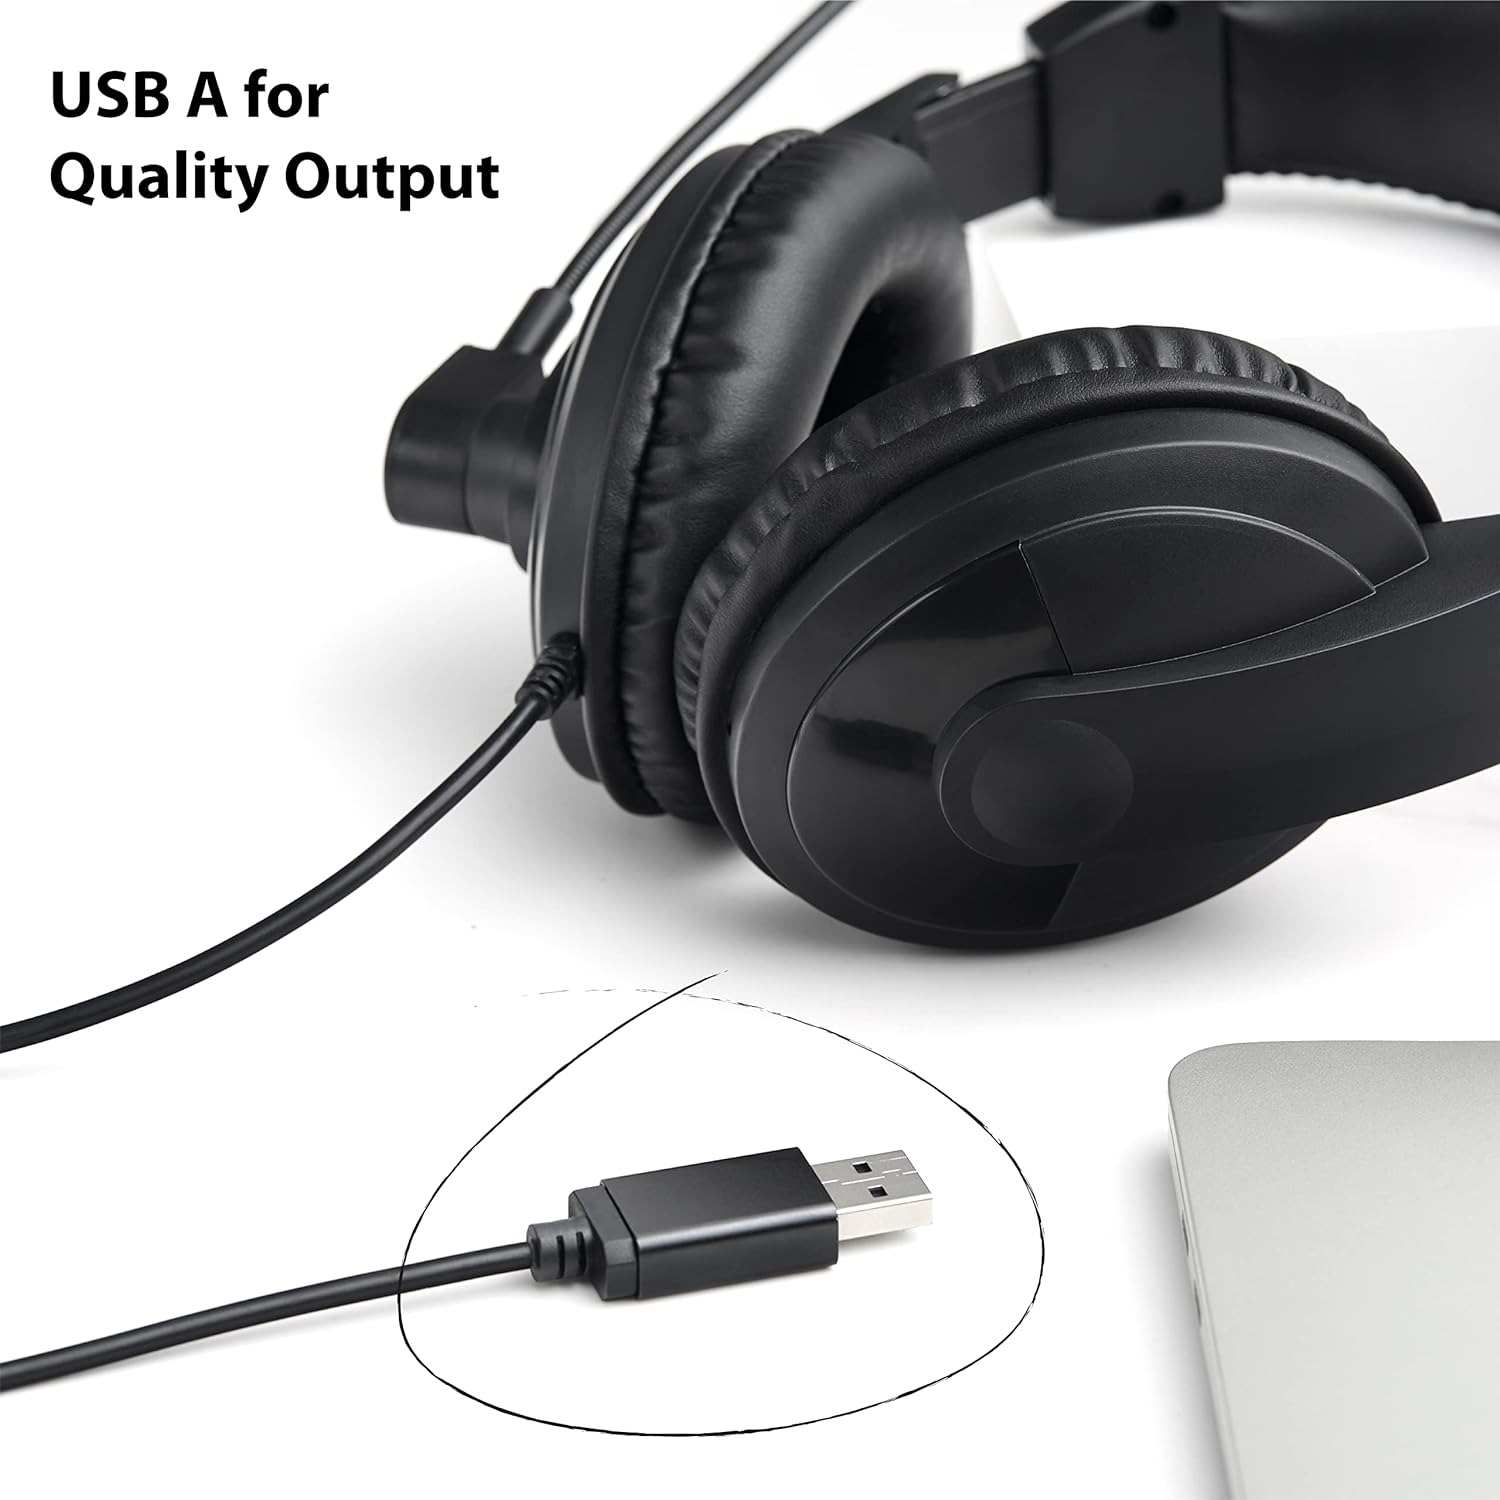 Rapoo H150 Stereo Wired Over Ear Headphones with Microphone Noise-Reduction, USB, Pc/Mac/Laptop/Chrome OS - Black